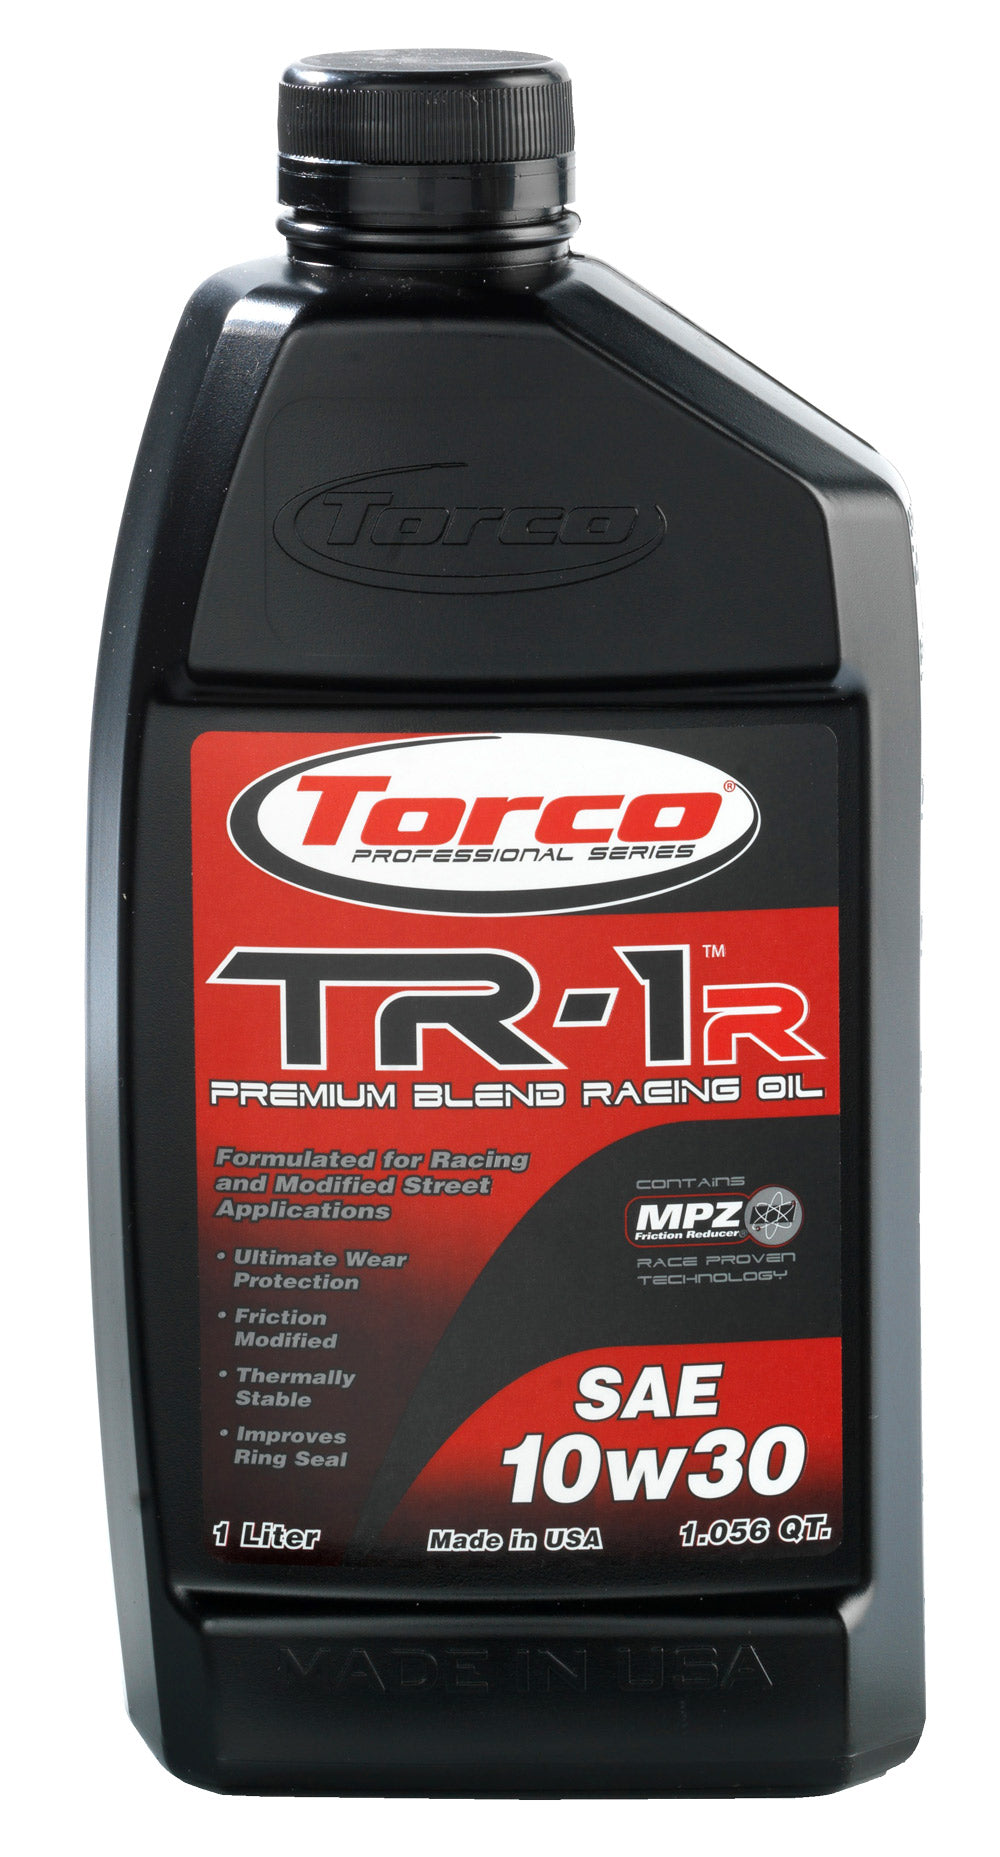 Torco TR-1R Racing Mineral Oil